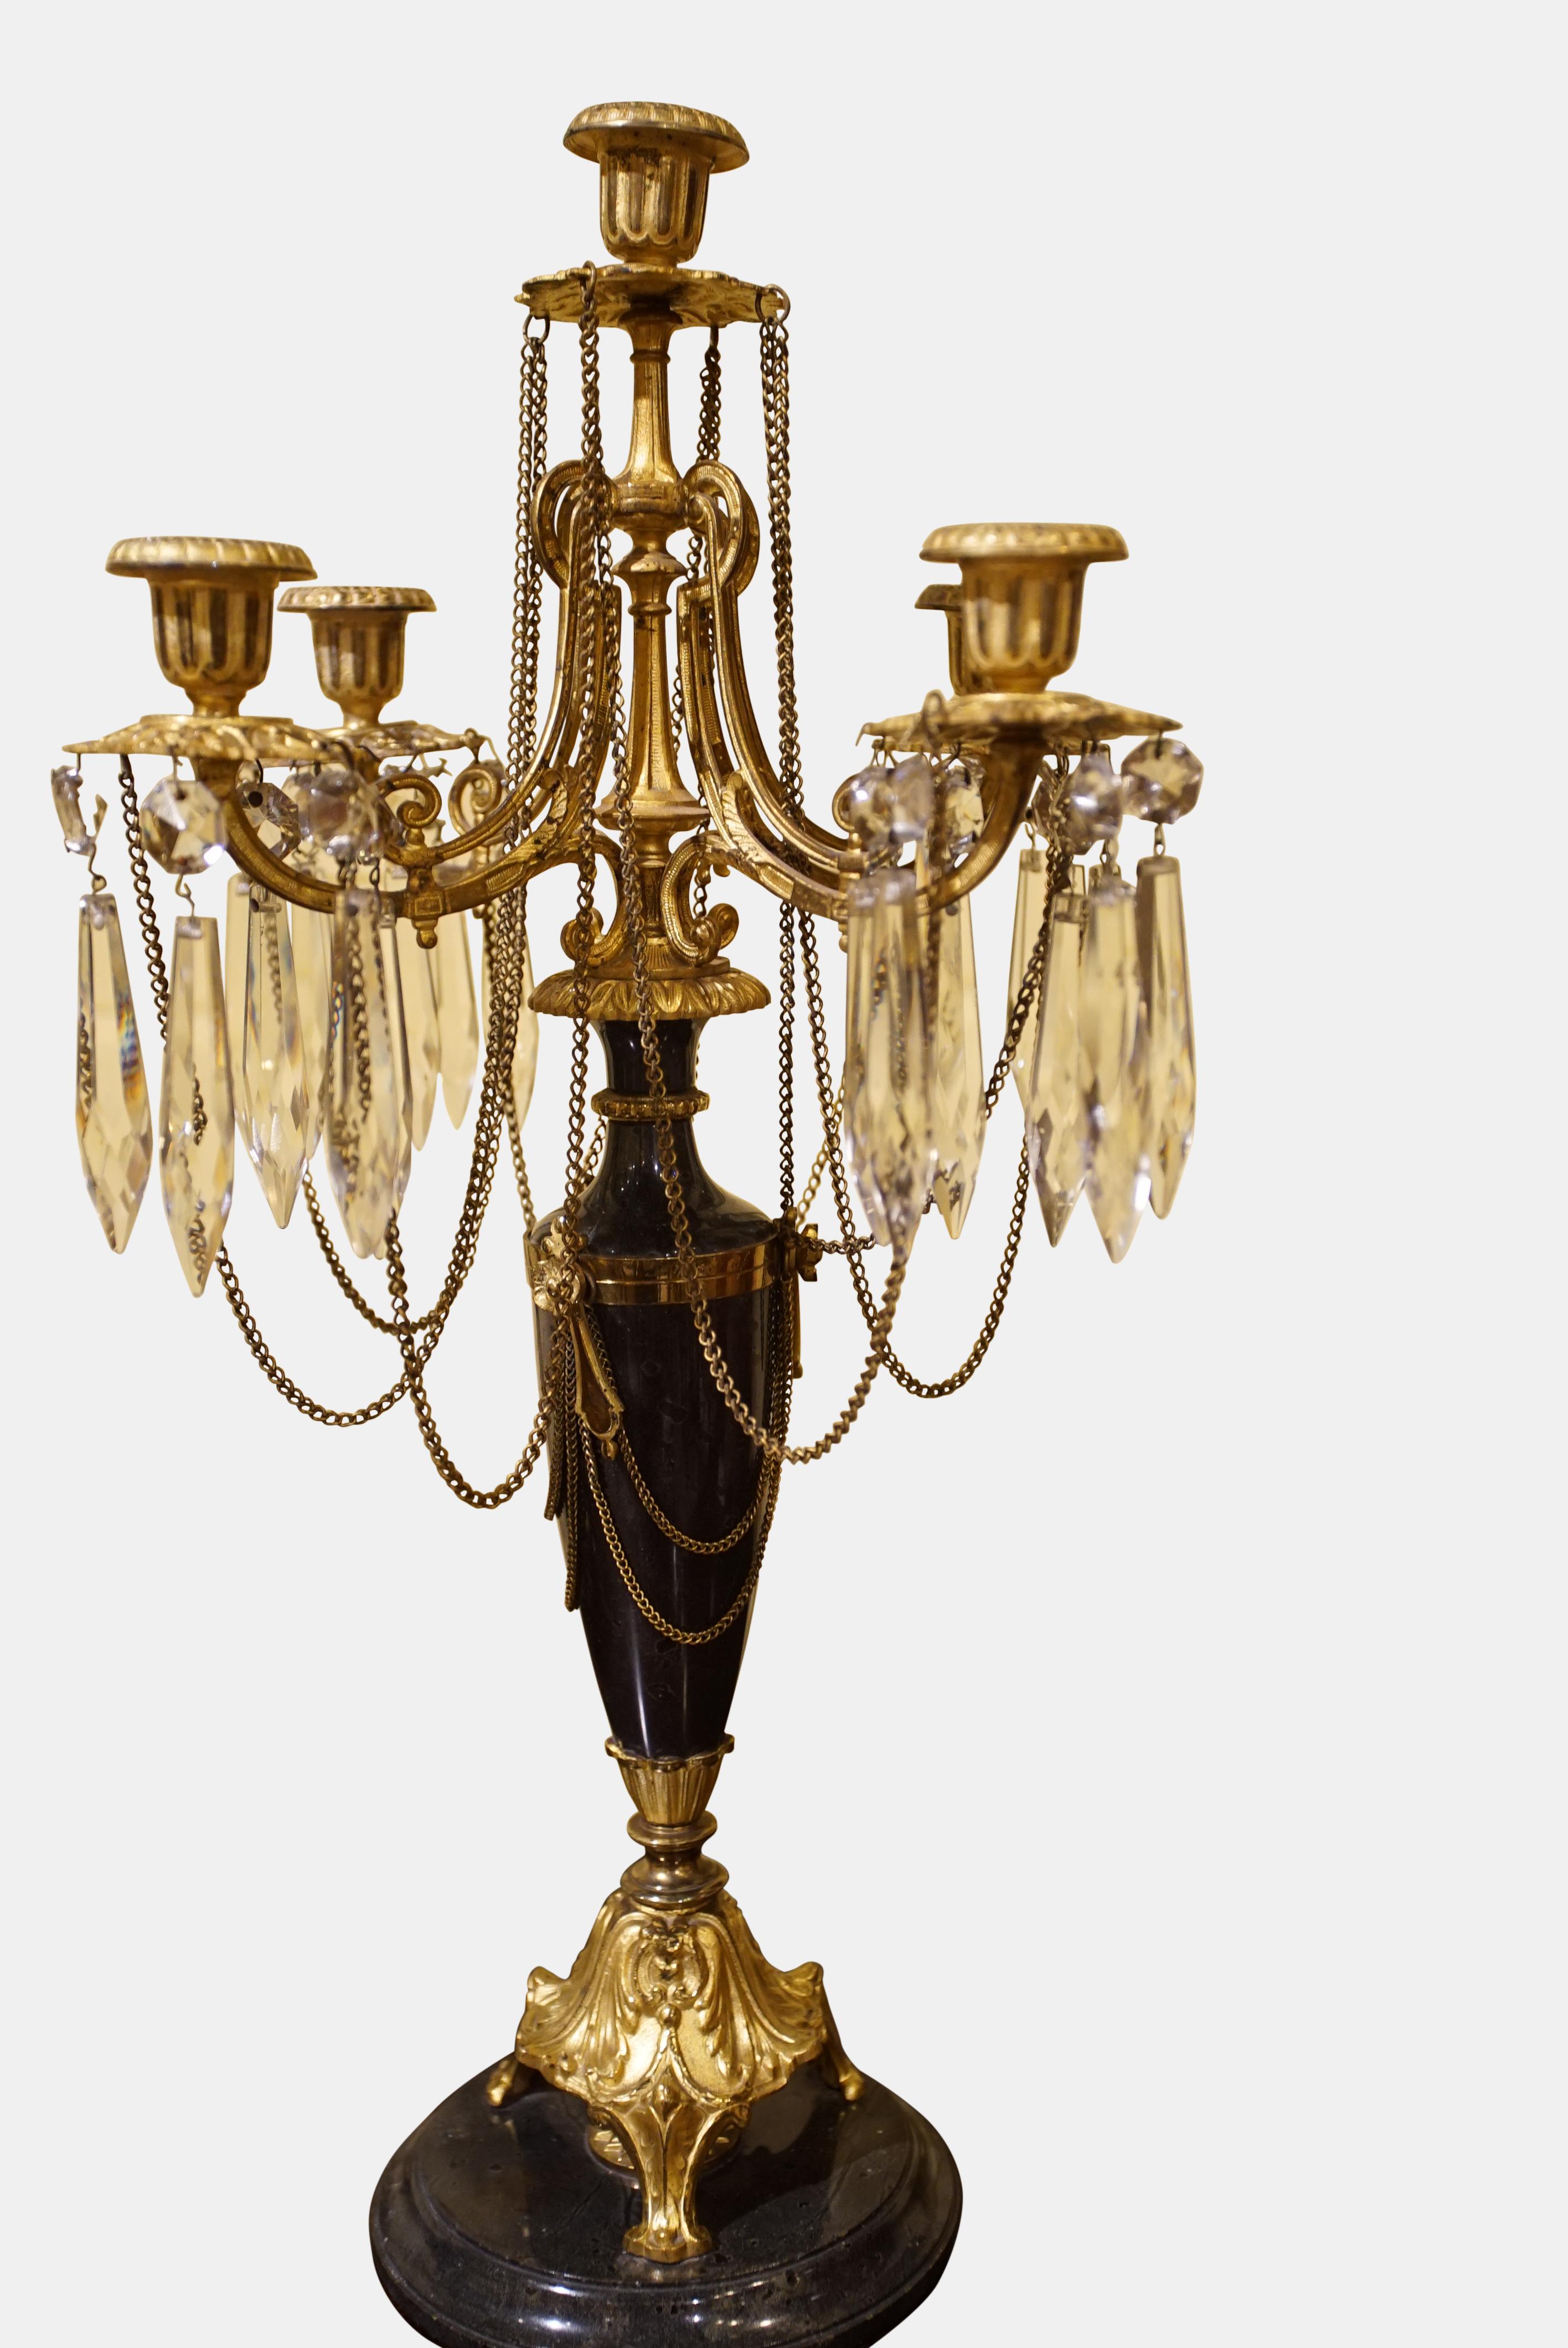 A pair of very fine 19th century gilt bronze and marble candelabra with cut glass lustres, inscribed (in Swedish) and dated 1870.